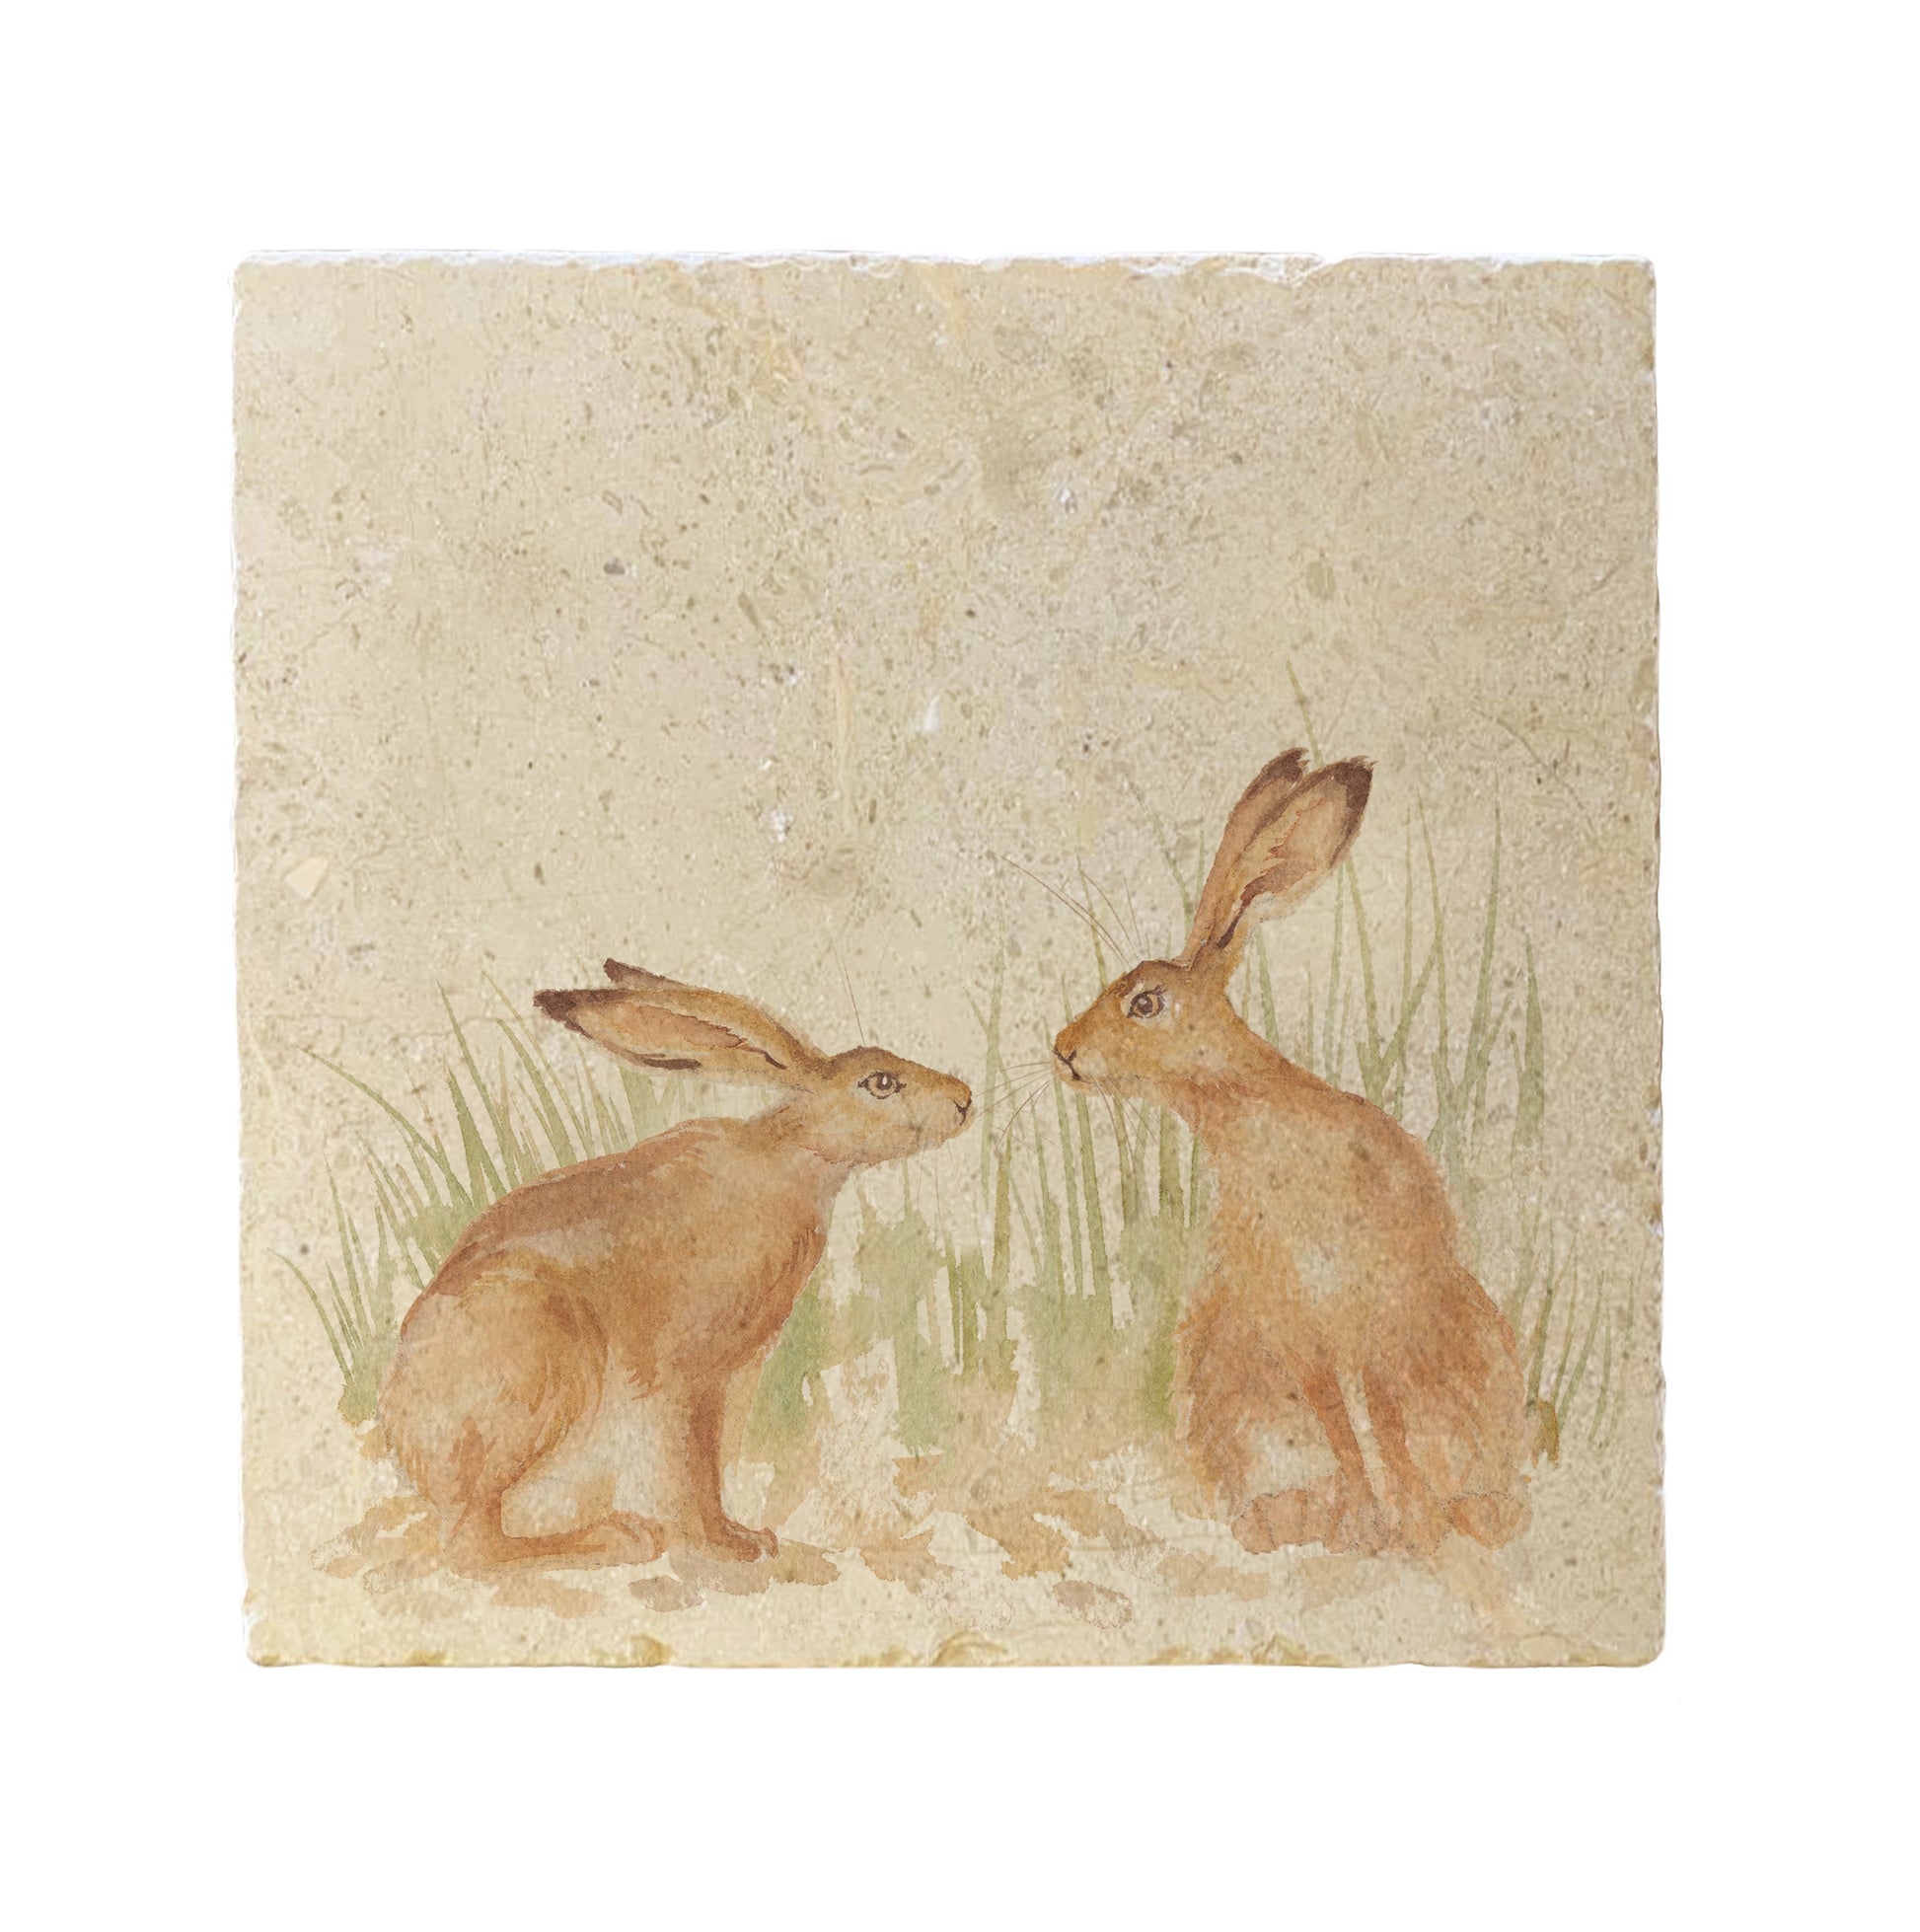 A square cream marble placemat featuring a watercolour countryside animal design of two hares facing each other about to touch noses.